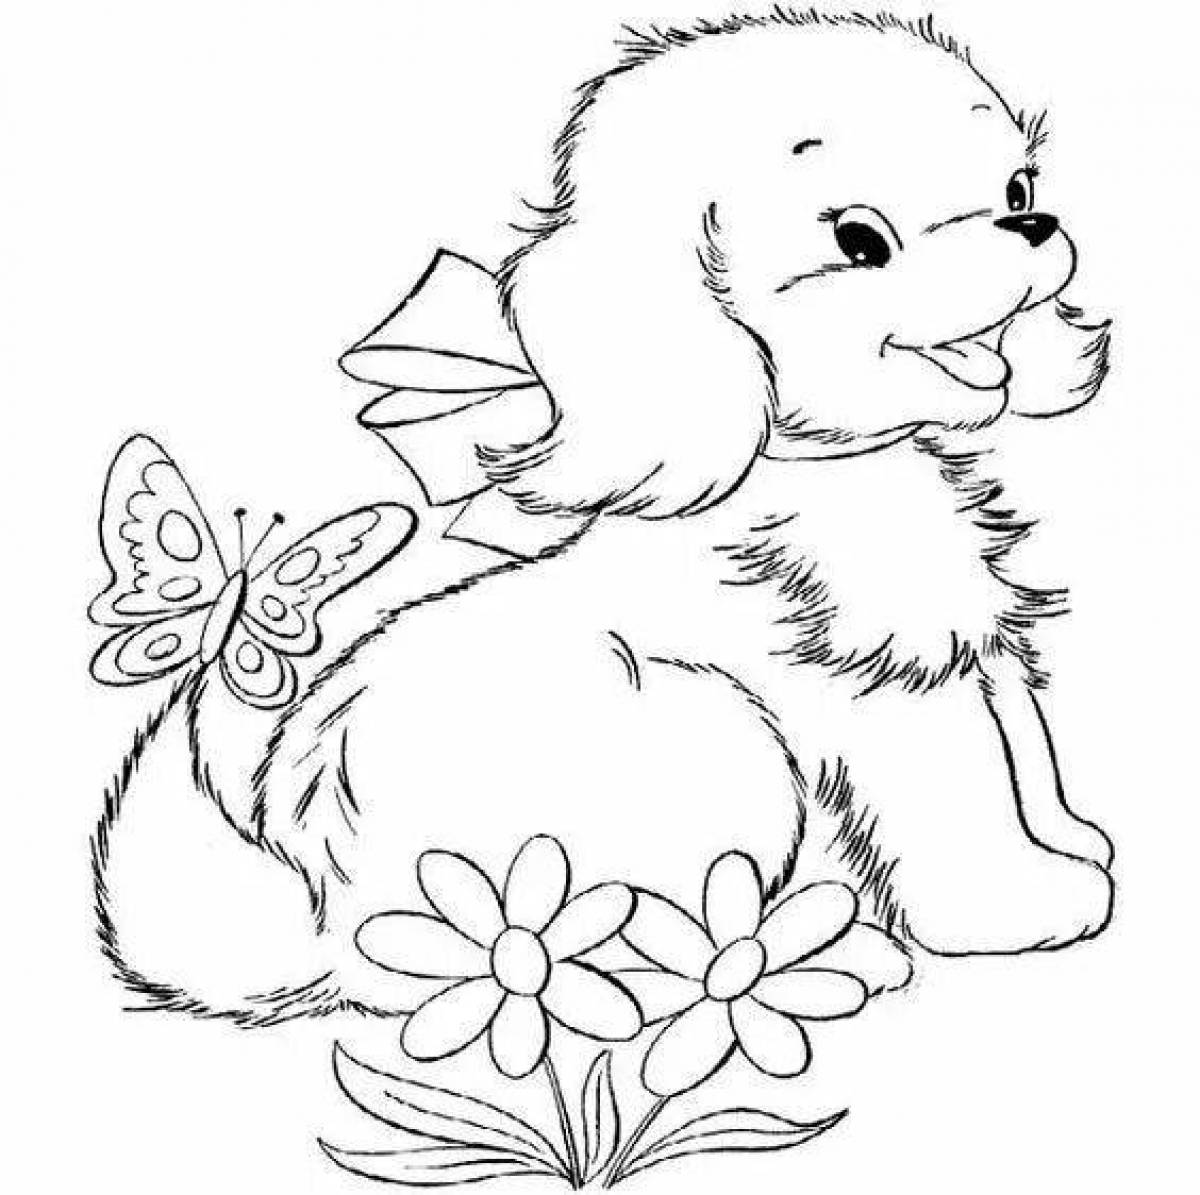 Coloring book shining kittens and puppies